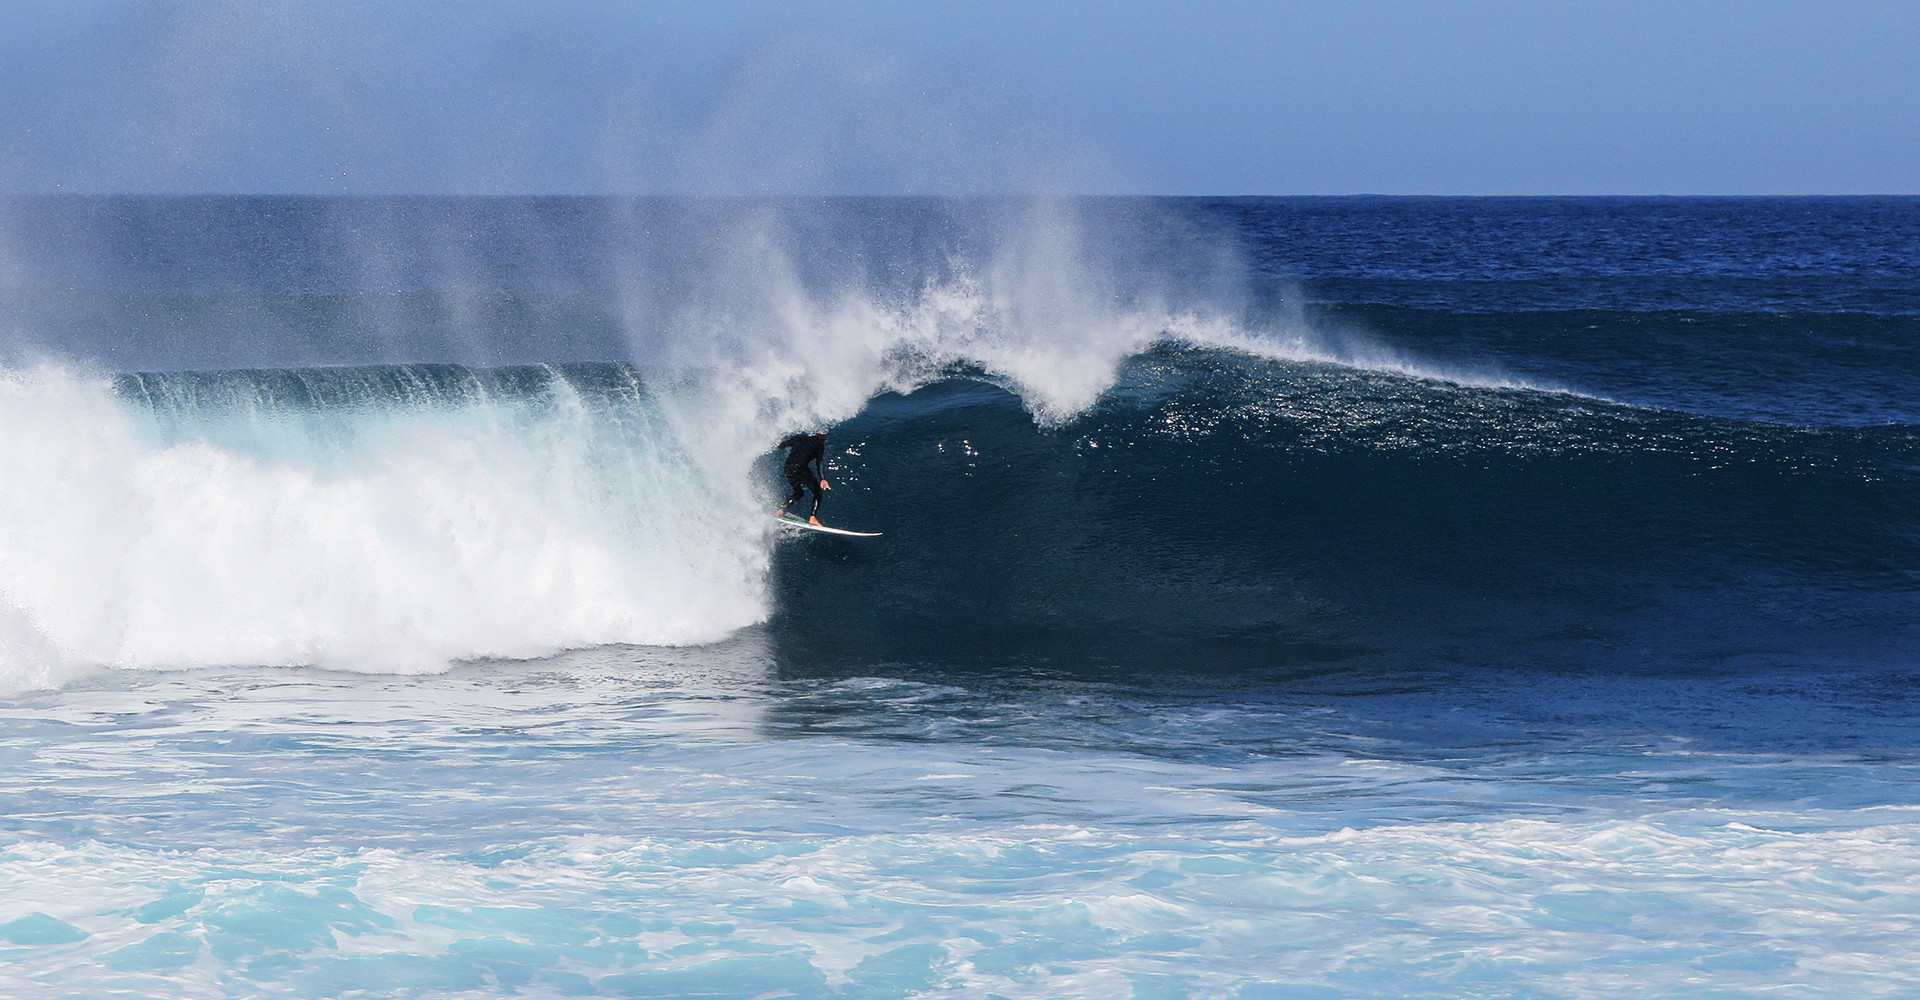 Mica is chasing tubes